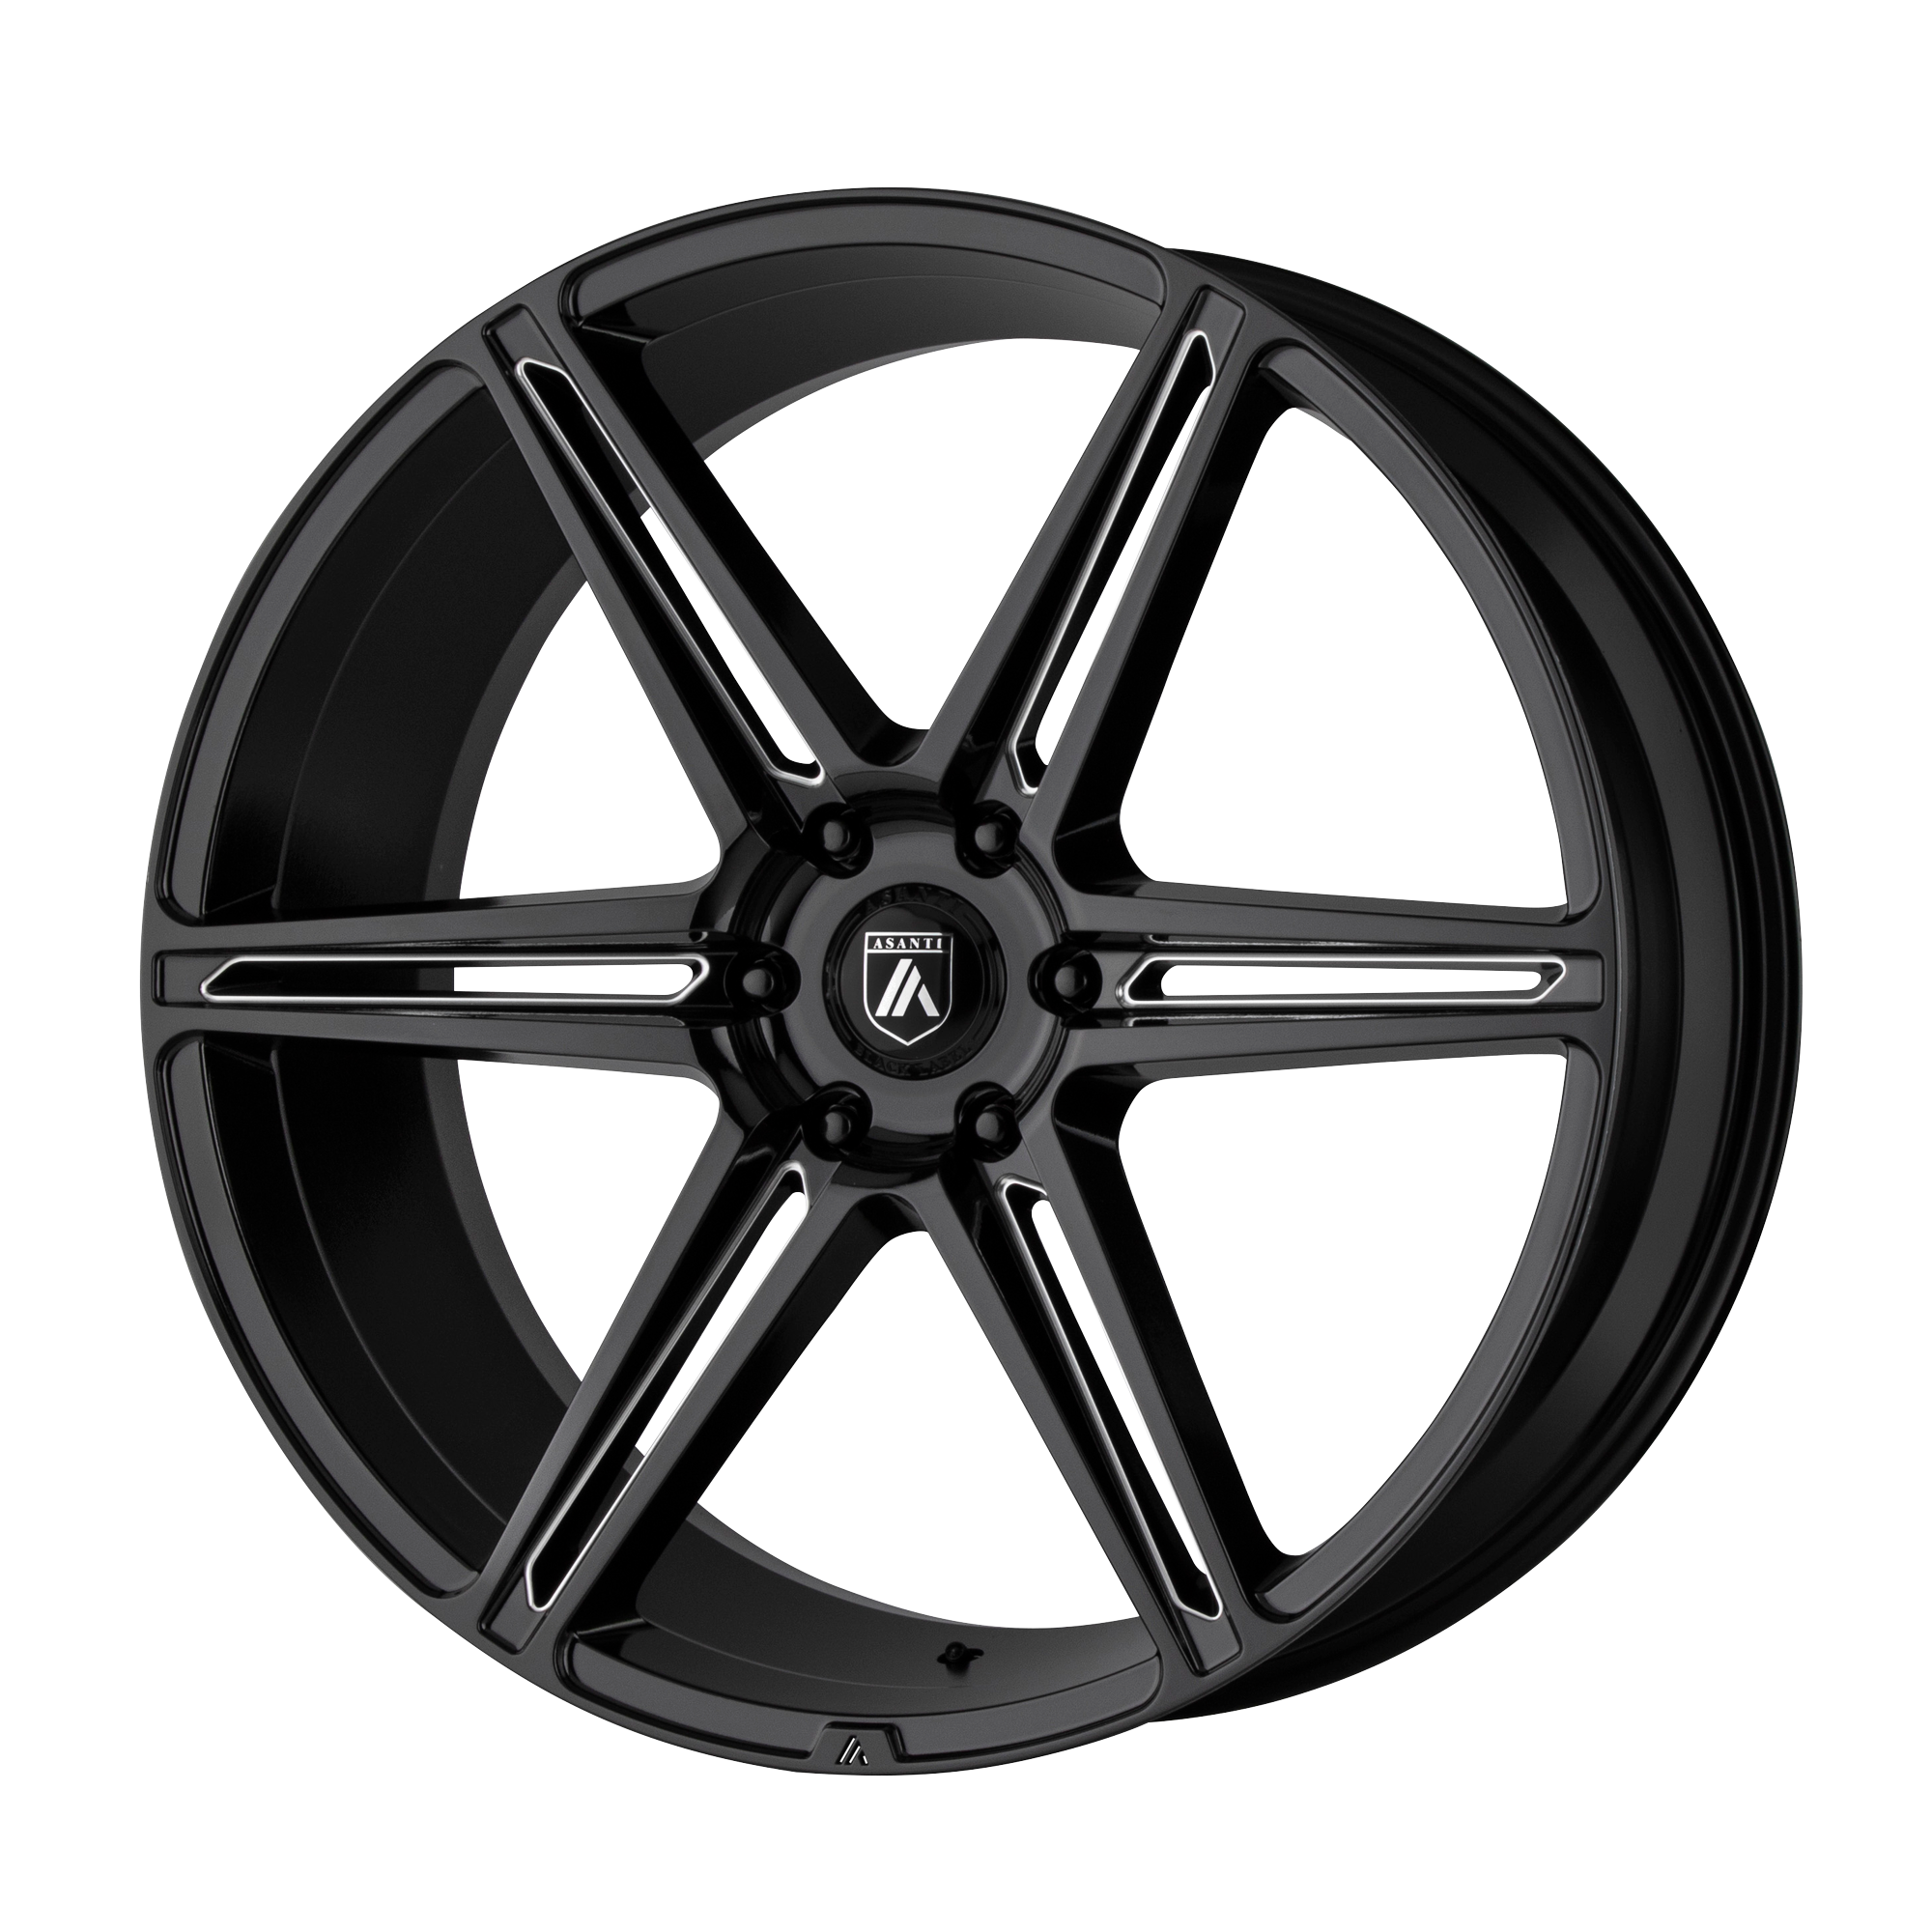 ALPHA 6 20x9 6x139.70 GLOSS BLACK MILLED (30 mm) - Tires and Engine Performance